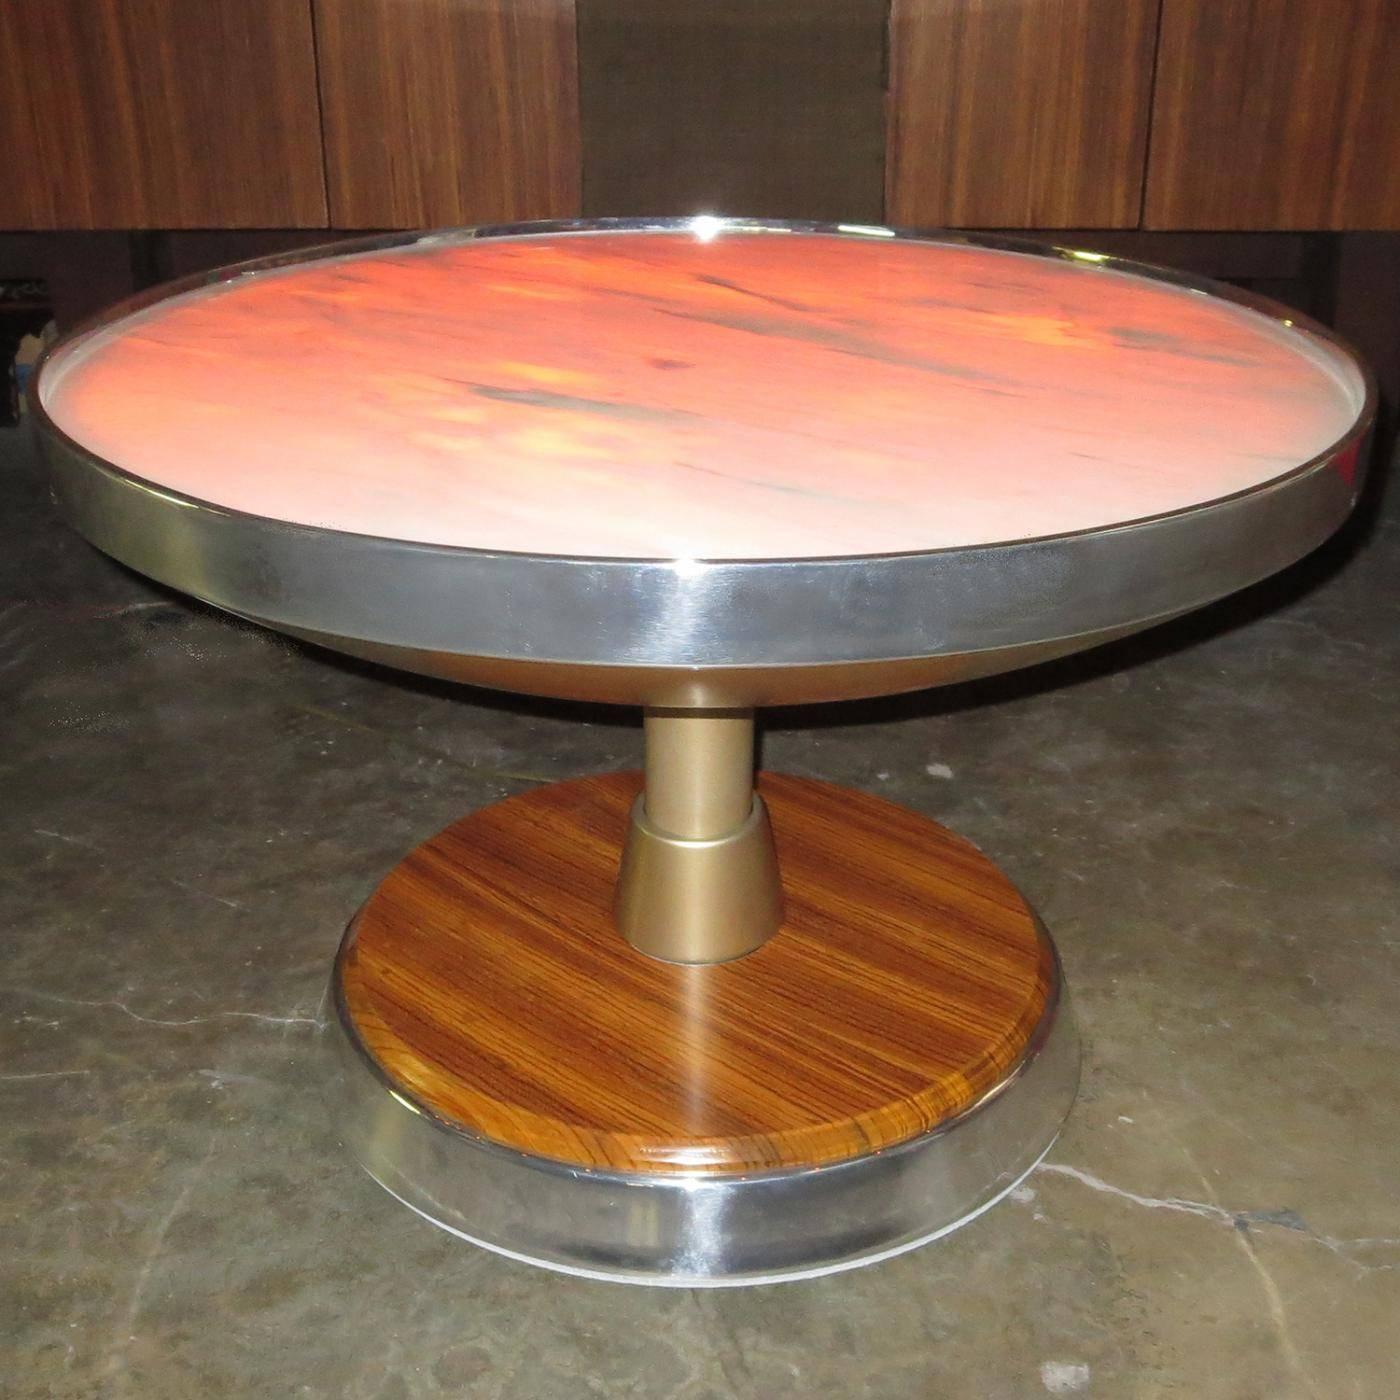 Lacquered Illuminated Side Table by Nino Zoncada for SS Stella Solaris Cruise Ship For Sale